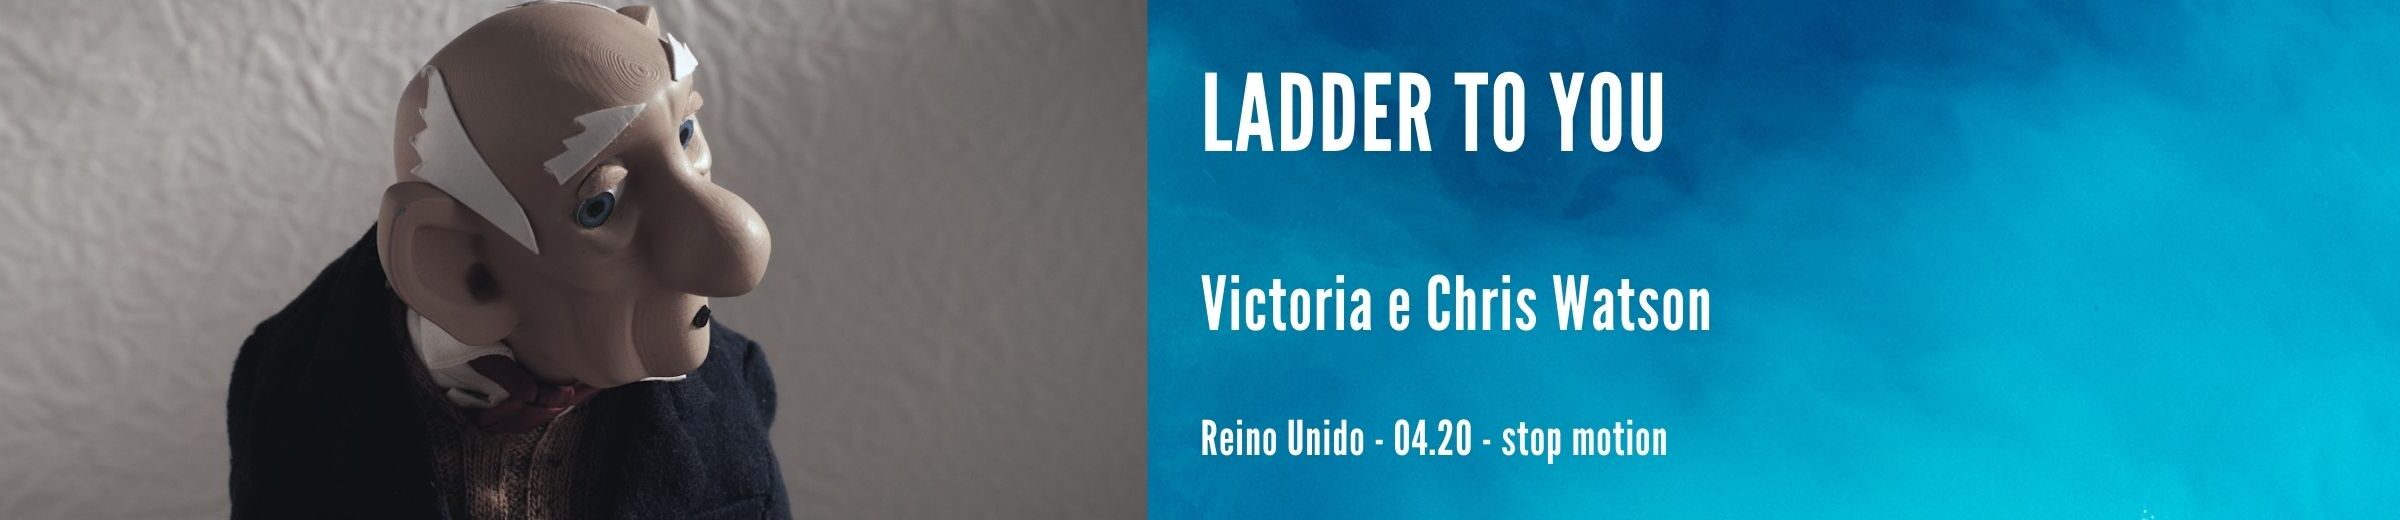 ladder to you